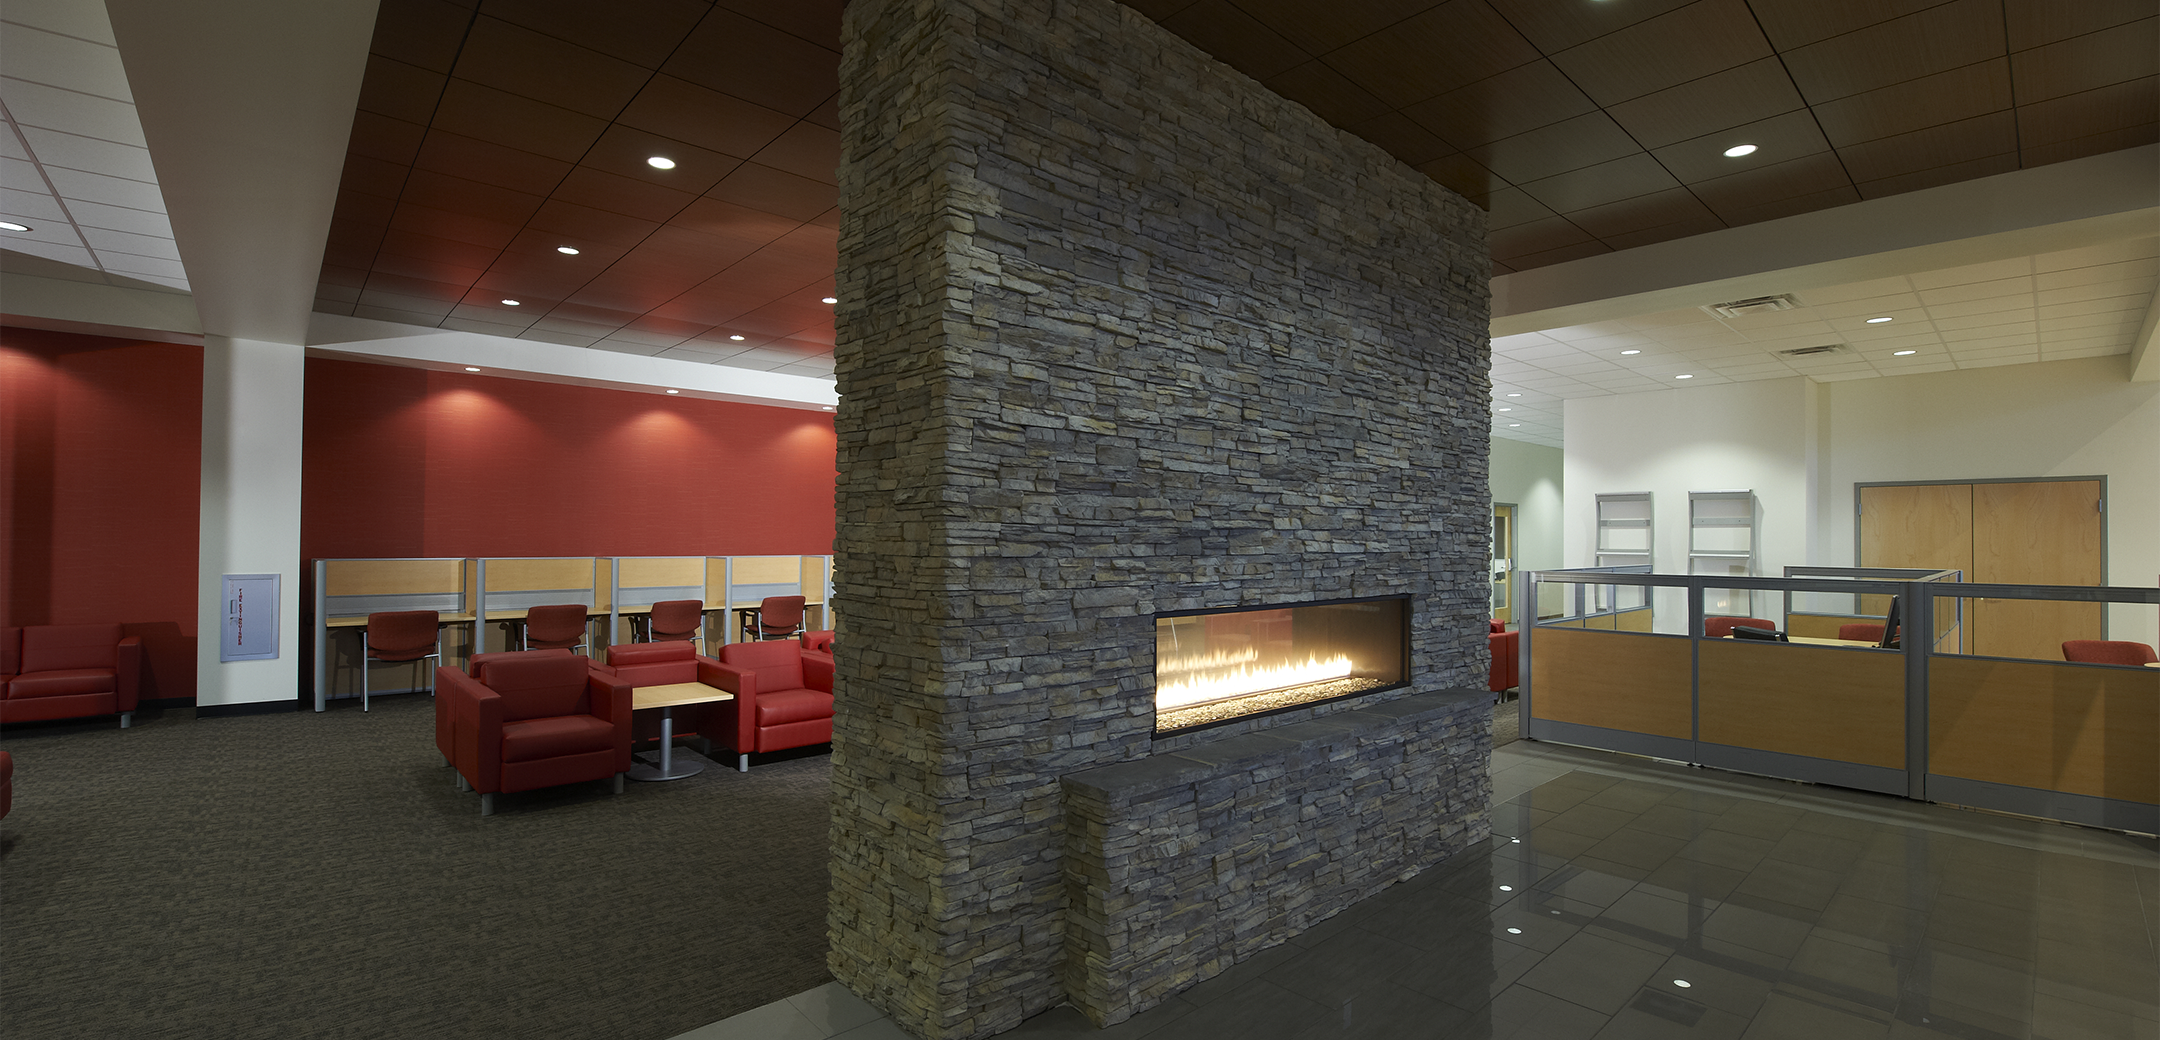 The interior view of the Sloane waiting lobby and sitting area with a brick fireplace in the center and employee cubicles in the background.